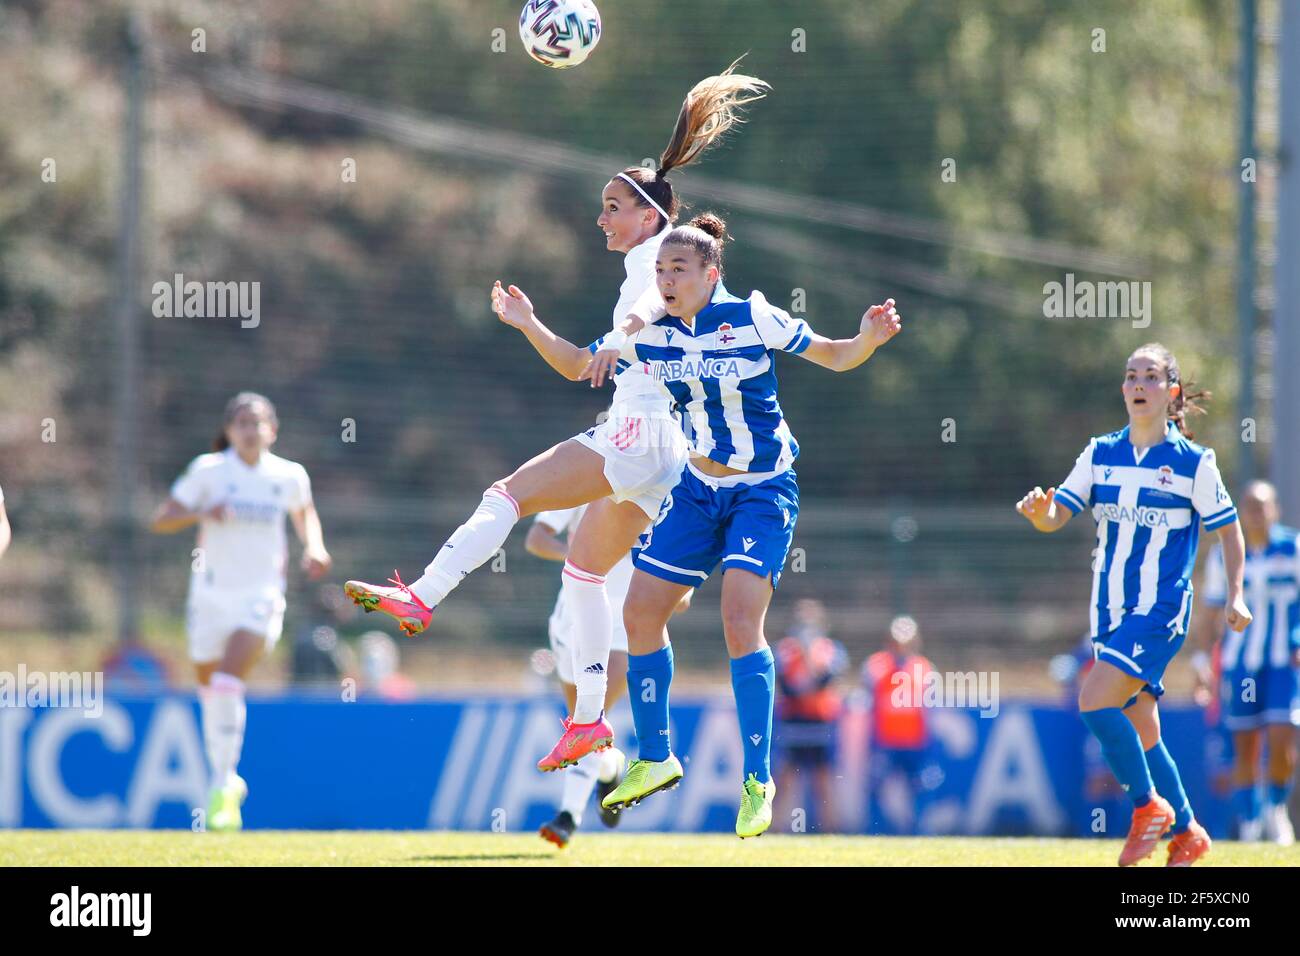 Noelia Villegas of Deportivo Abanca competes for the ball with Kosovare Asllani of Real Madrid during the women's first division Iberdrola league Stock Photo